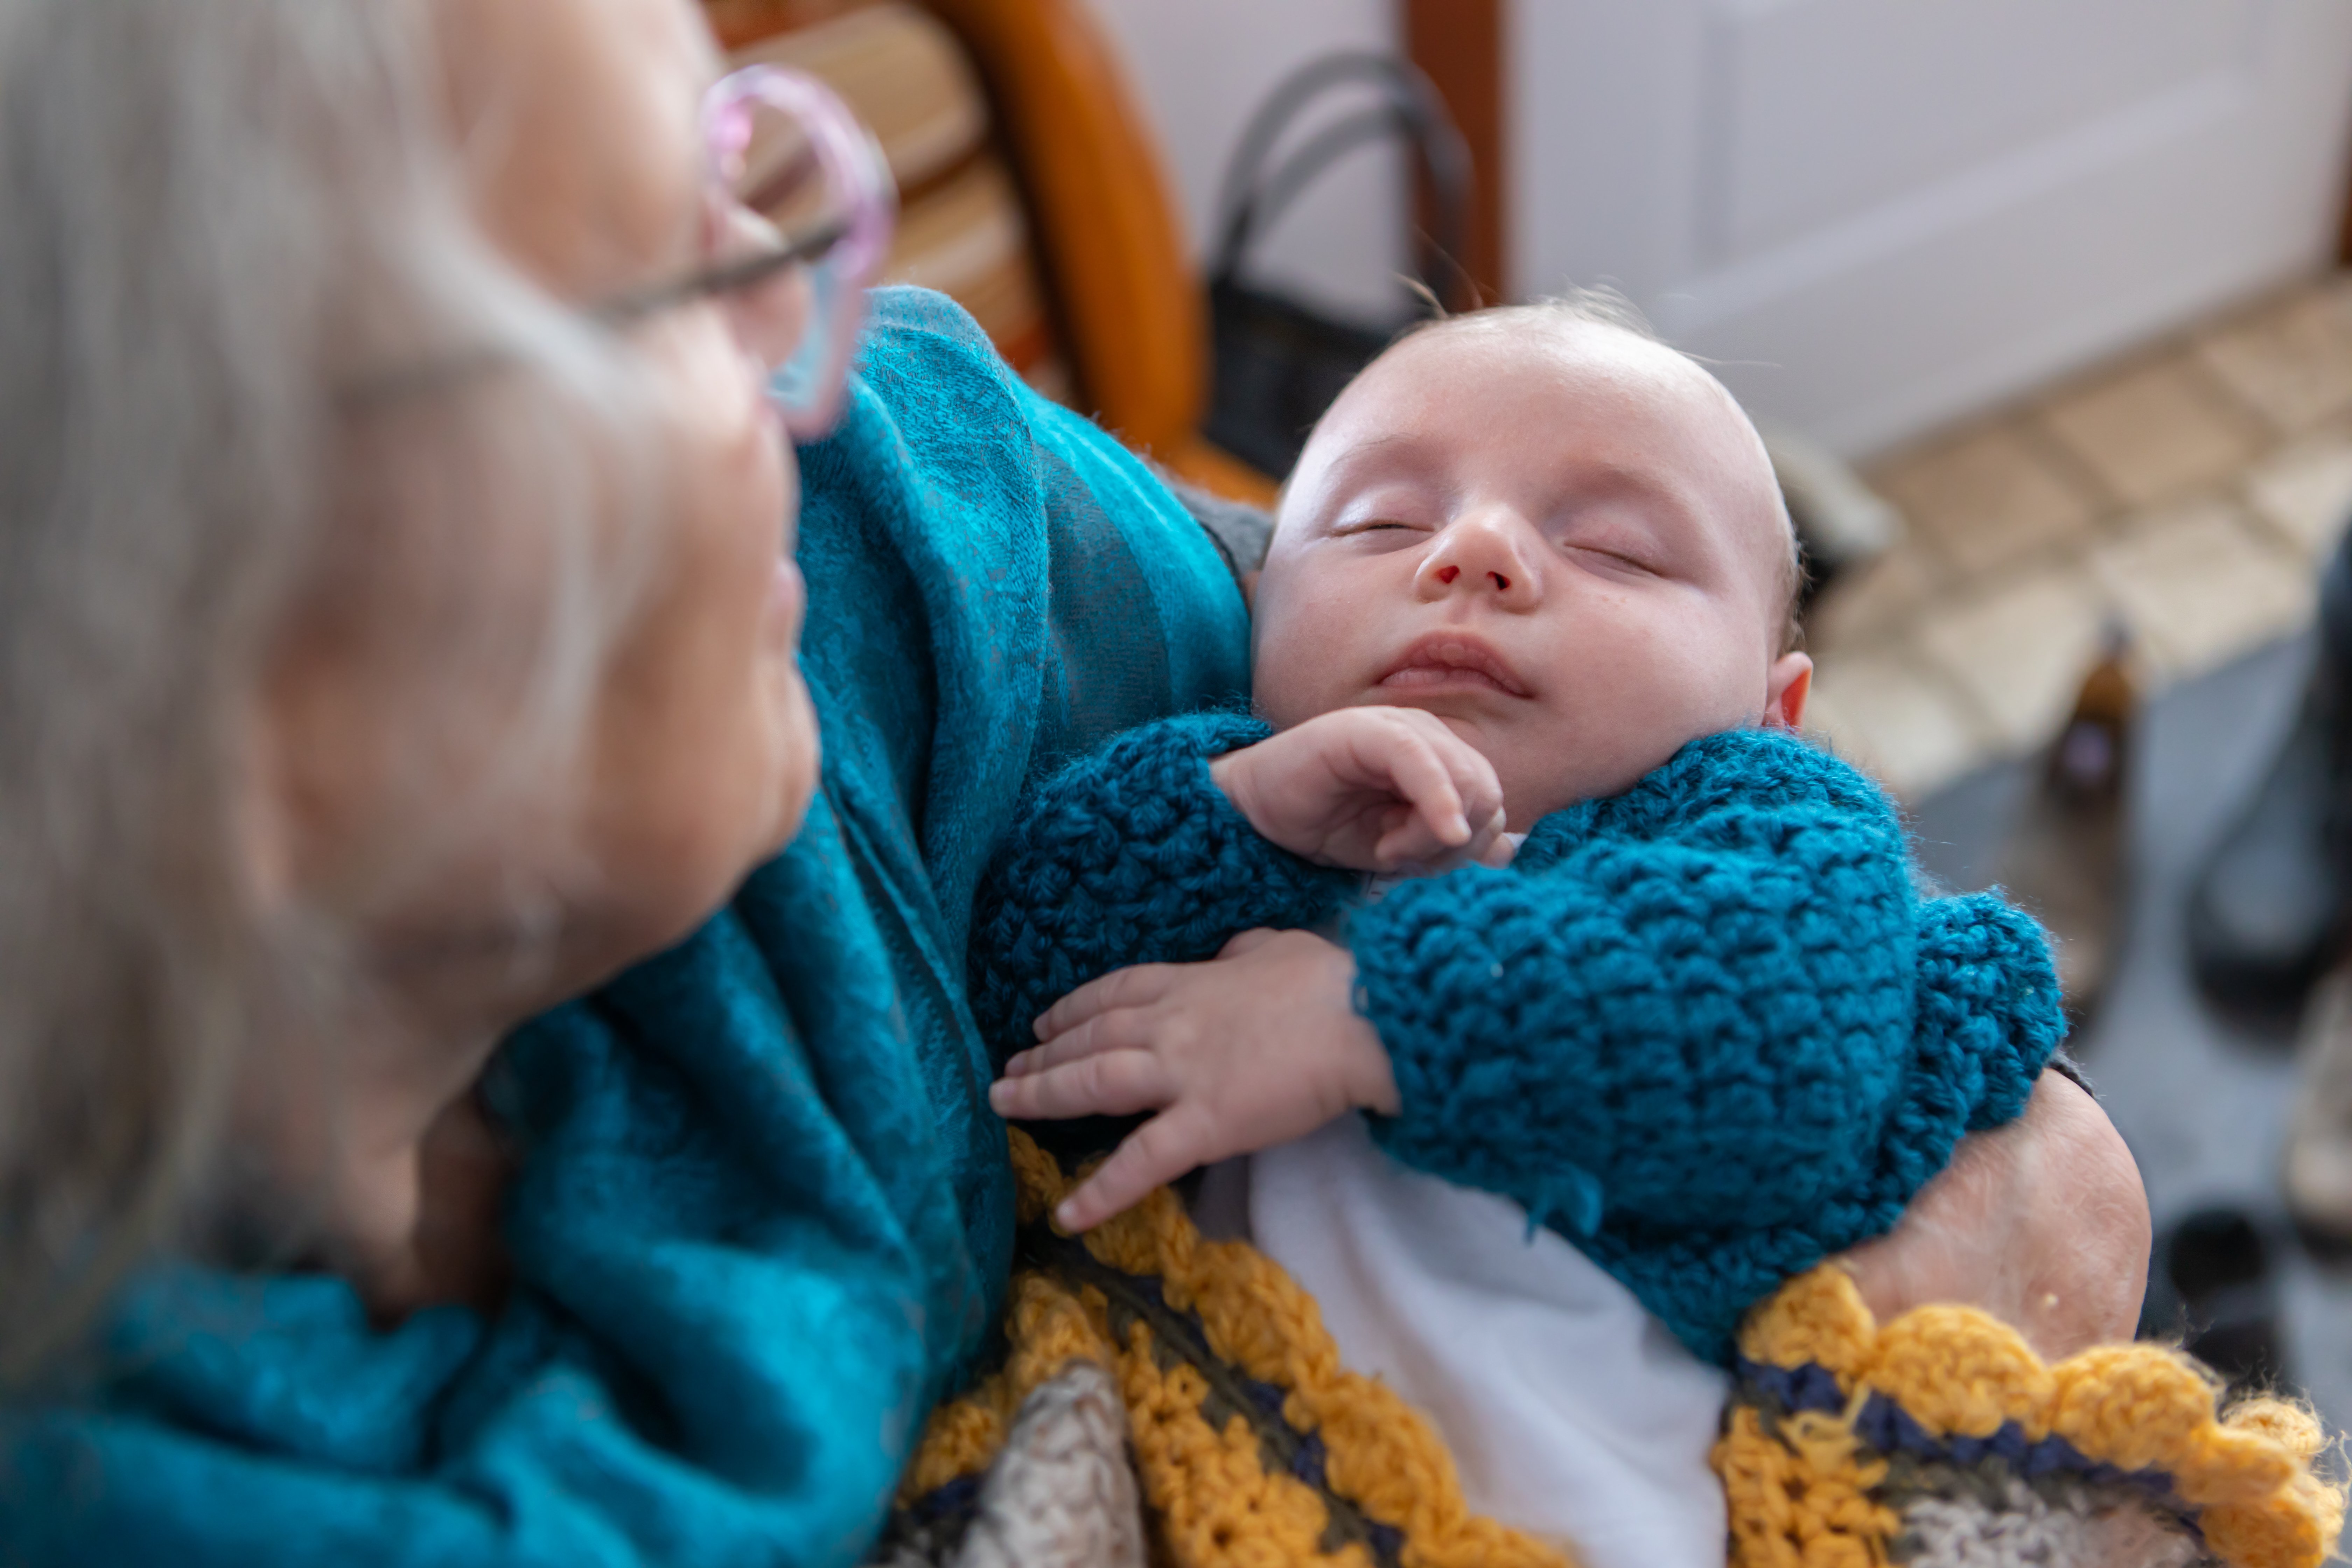 Elderly woman holds a baby. | Source: Shutterstock